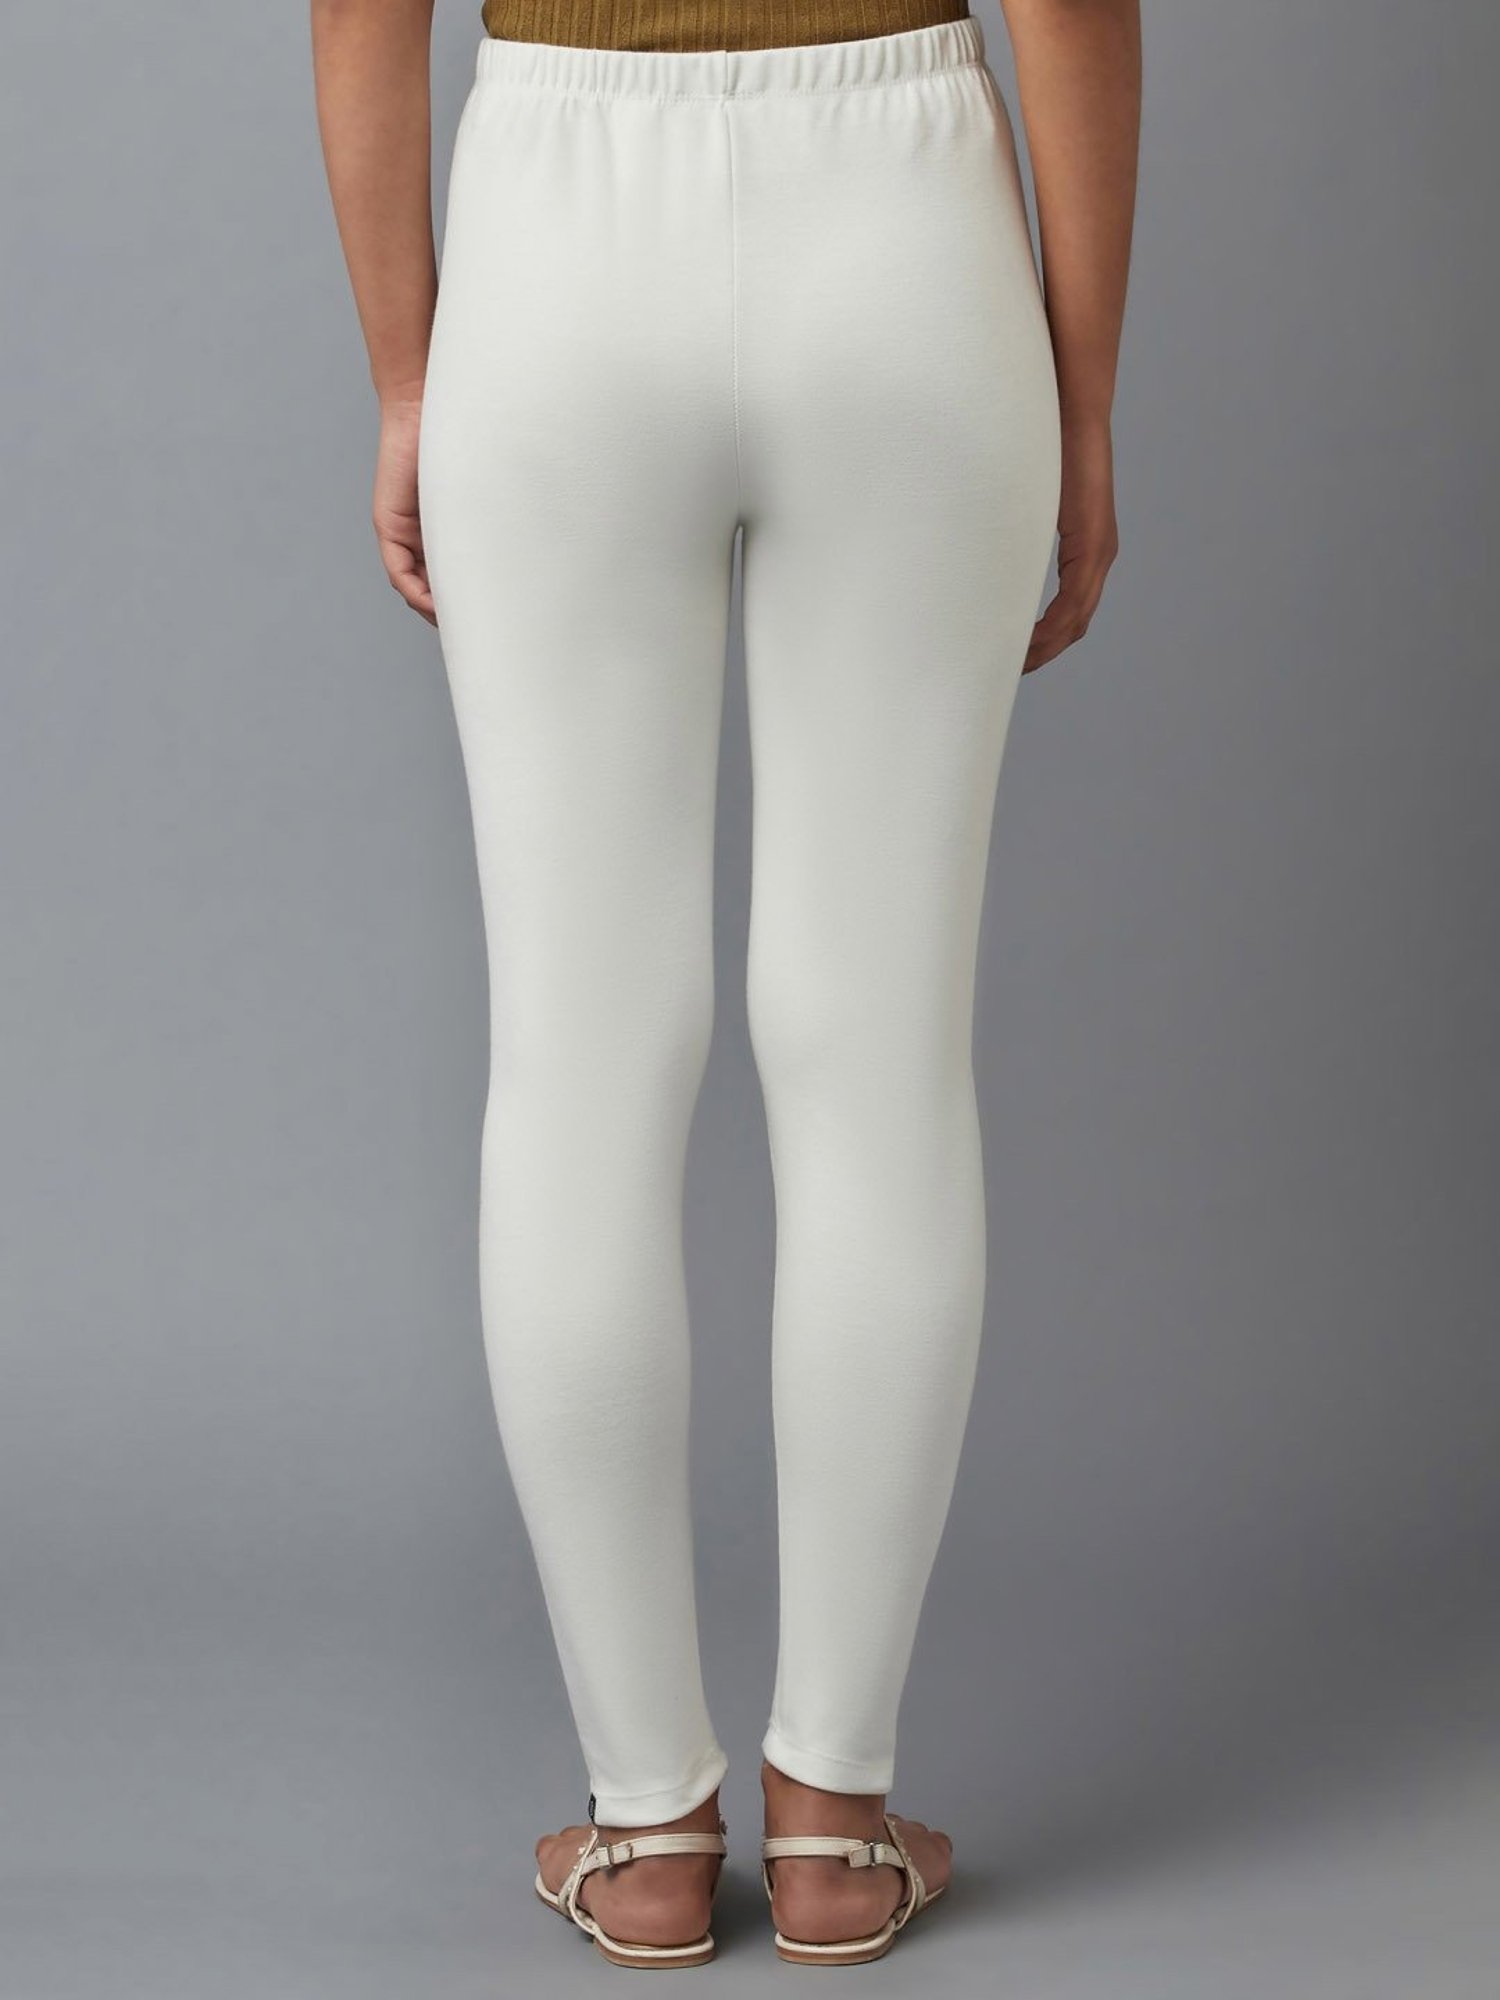 Buy TAG 7 TAG 7 Women Silver-Toned Solid Ankle-Length Leggings at Redfynd